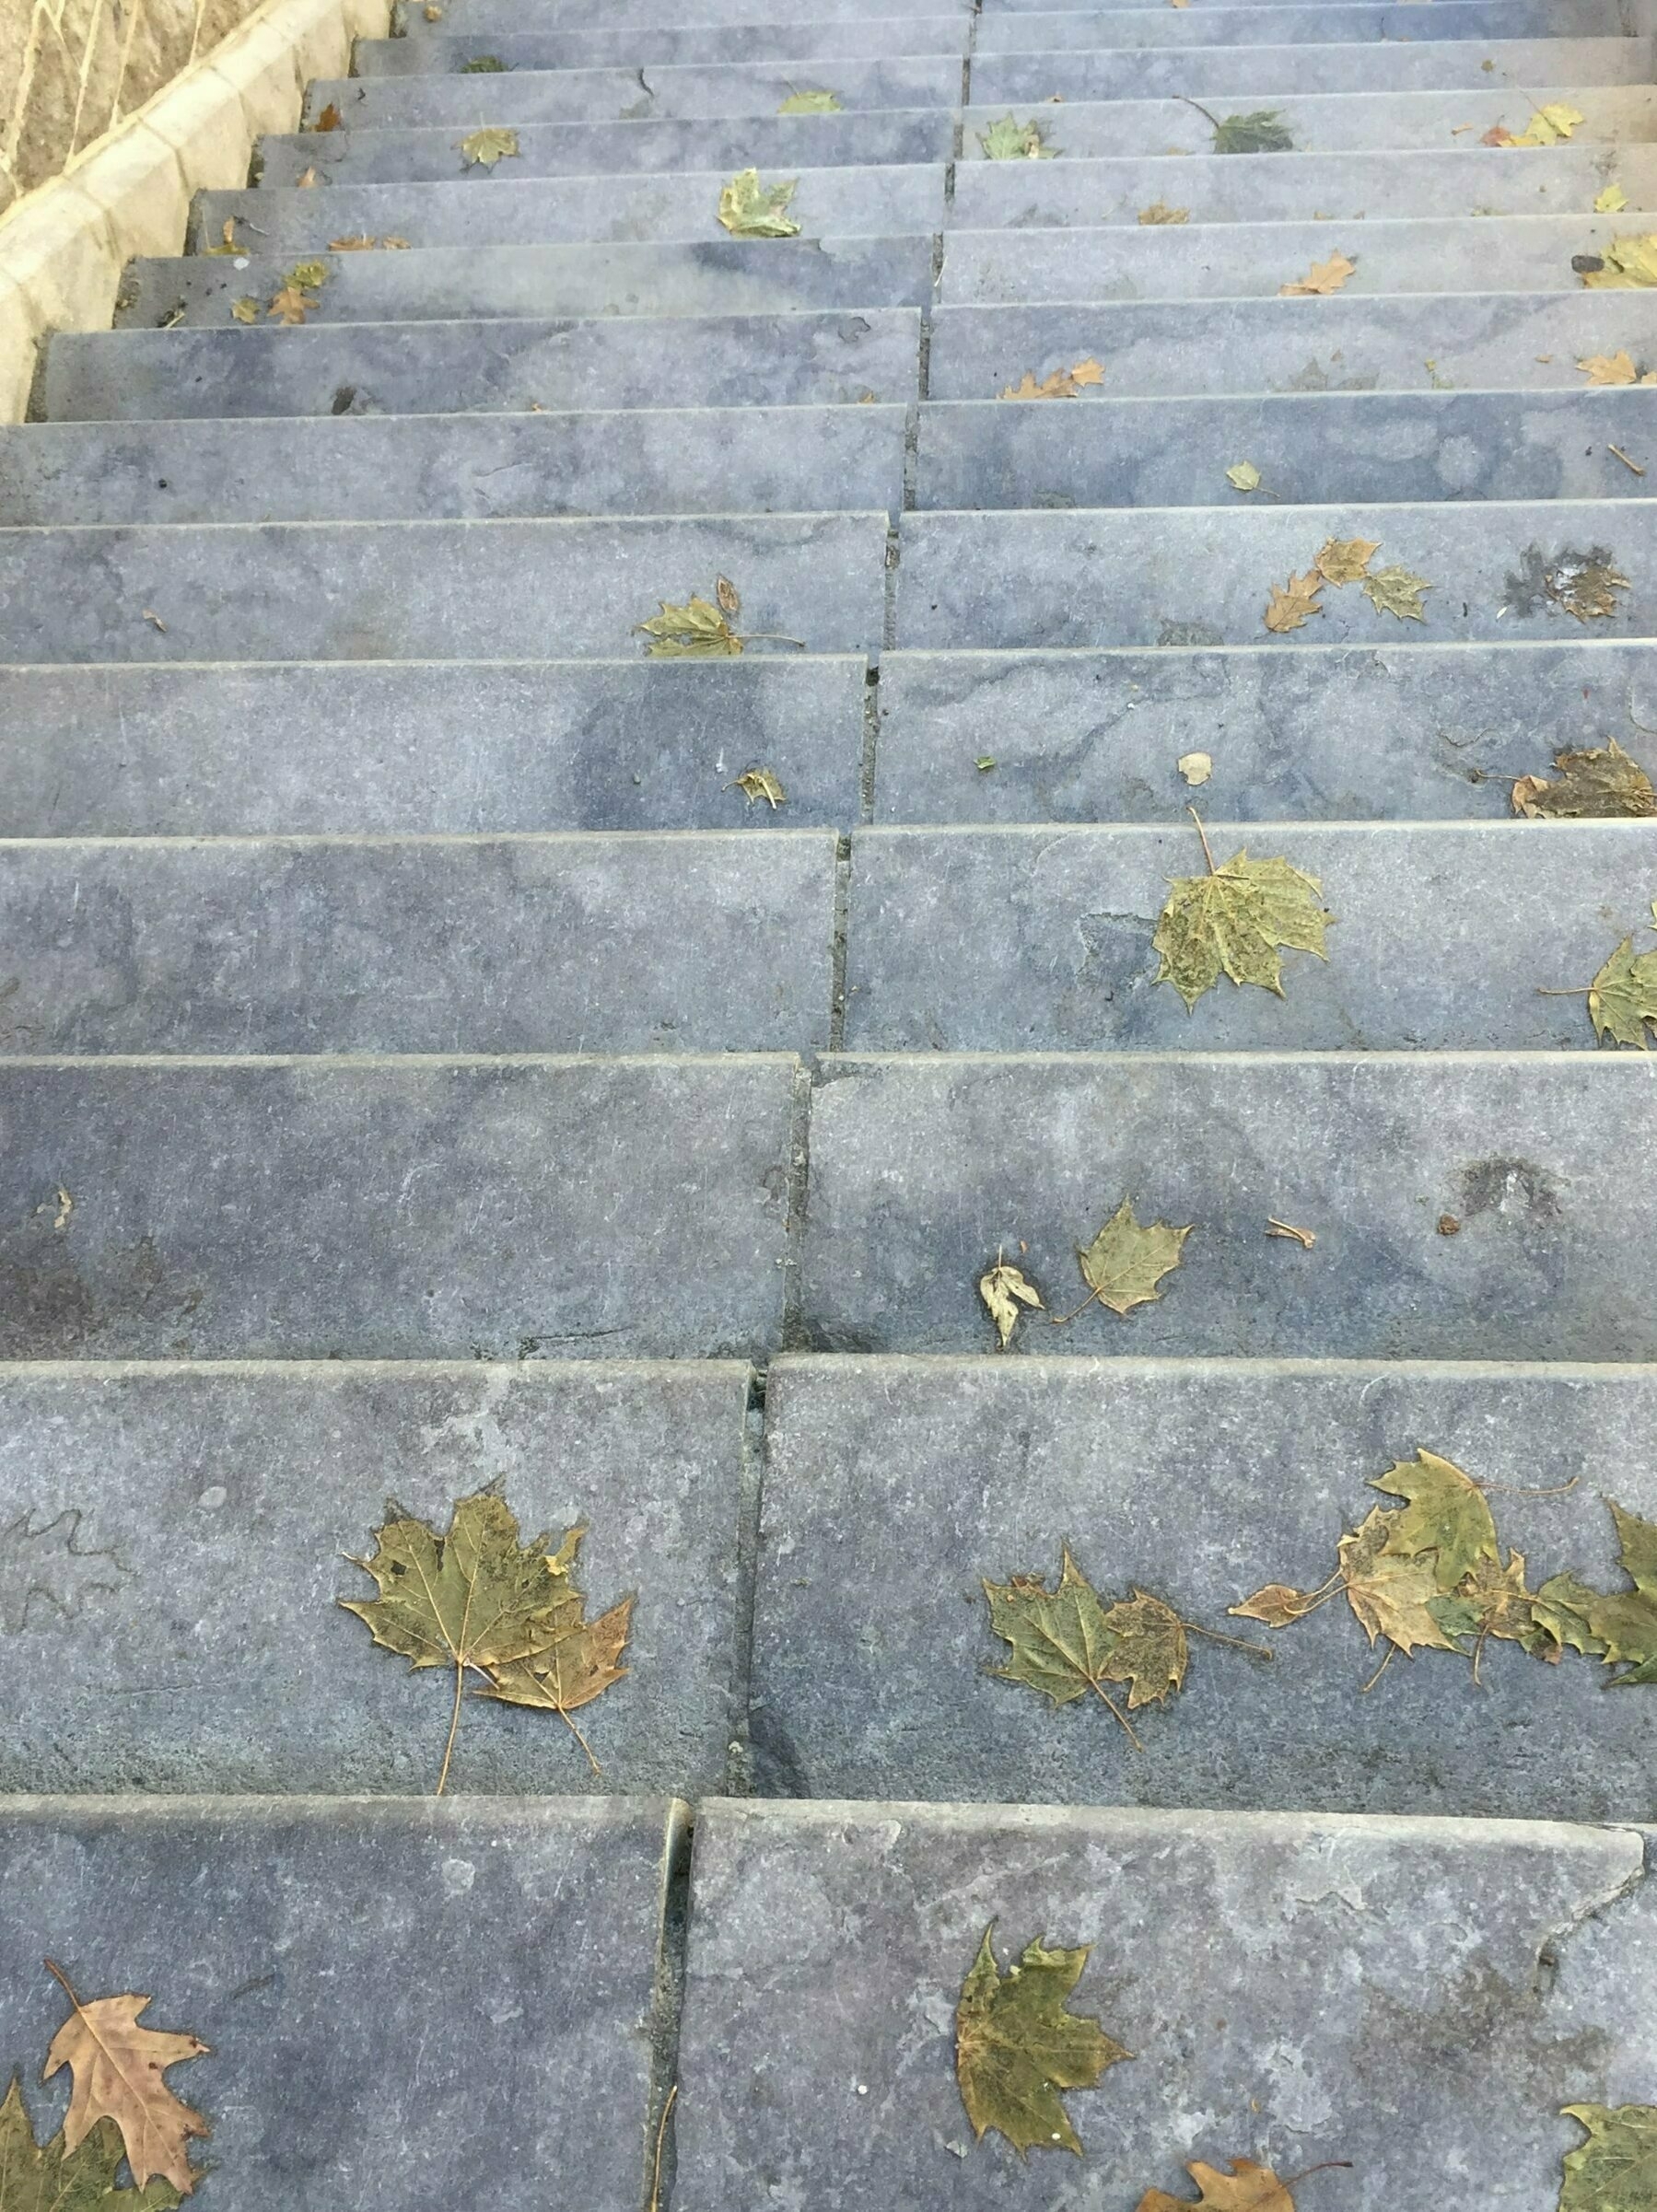 Going down these slippery steps with a few fallen maple leaves plastered on them here and there.